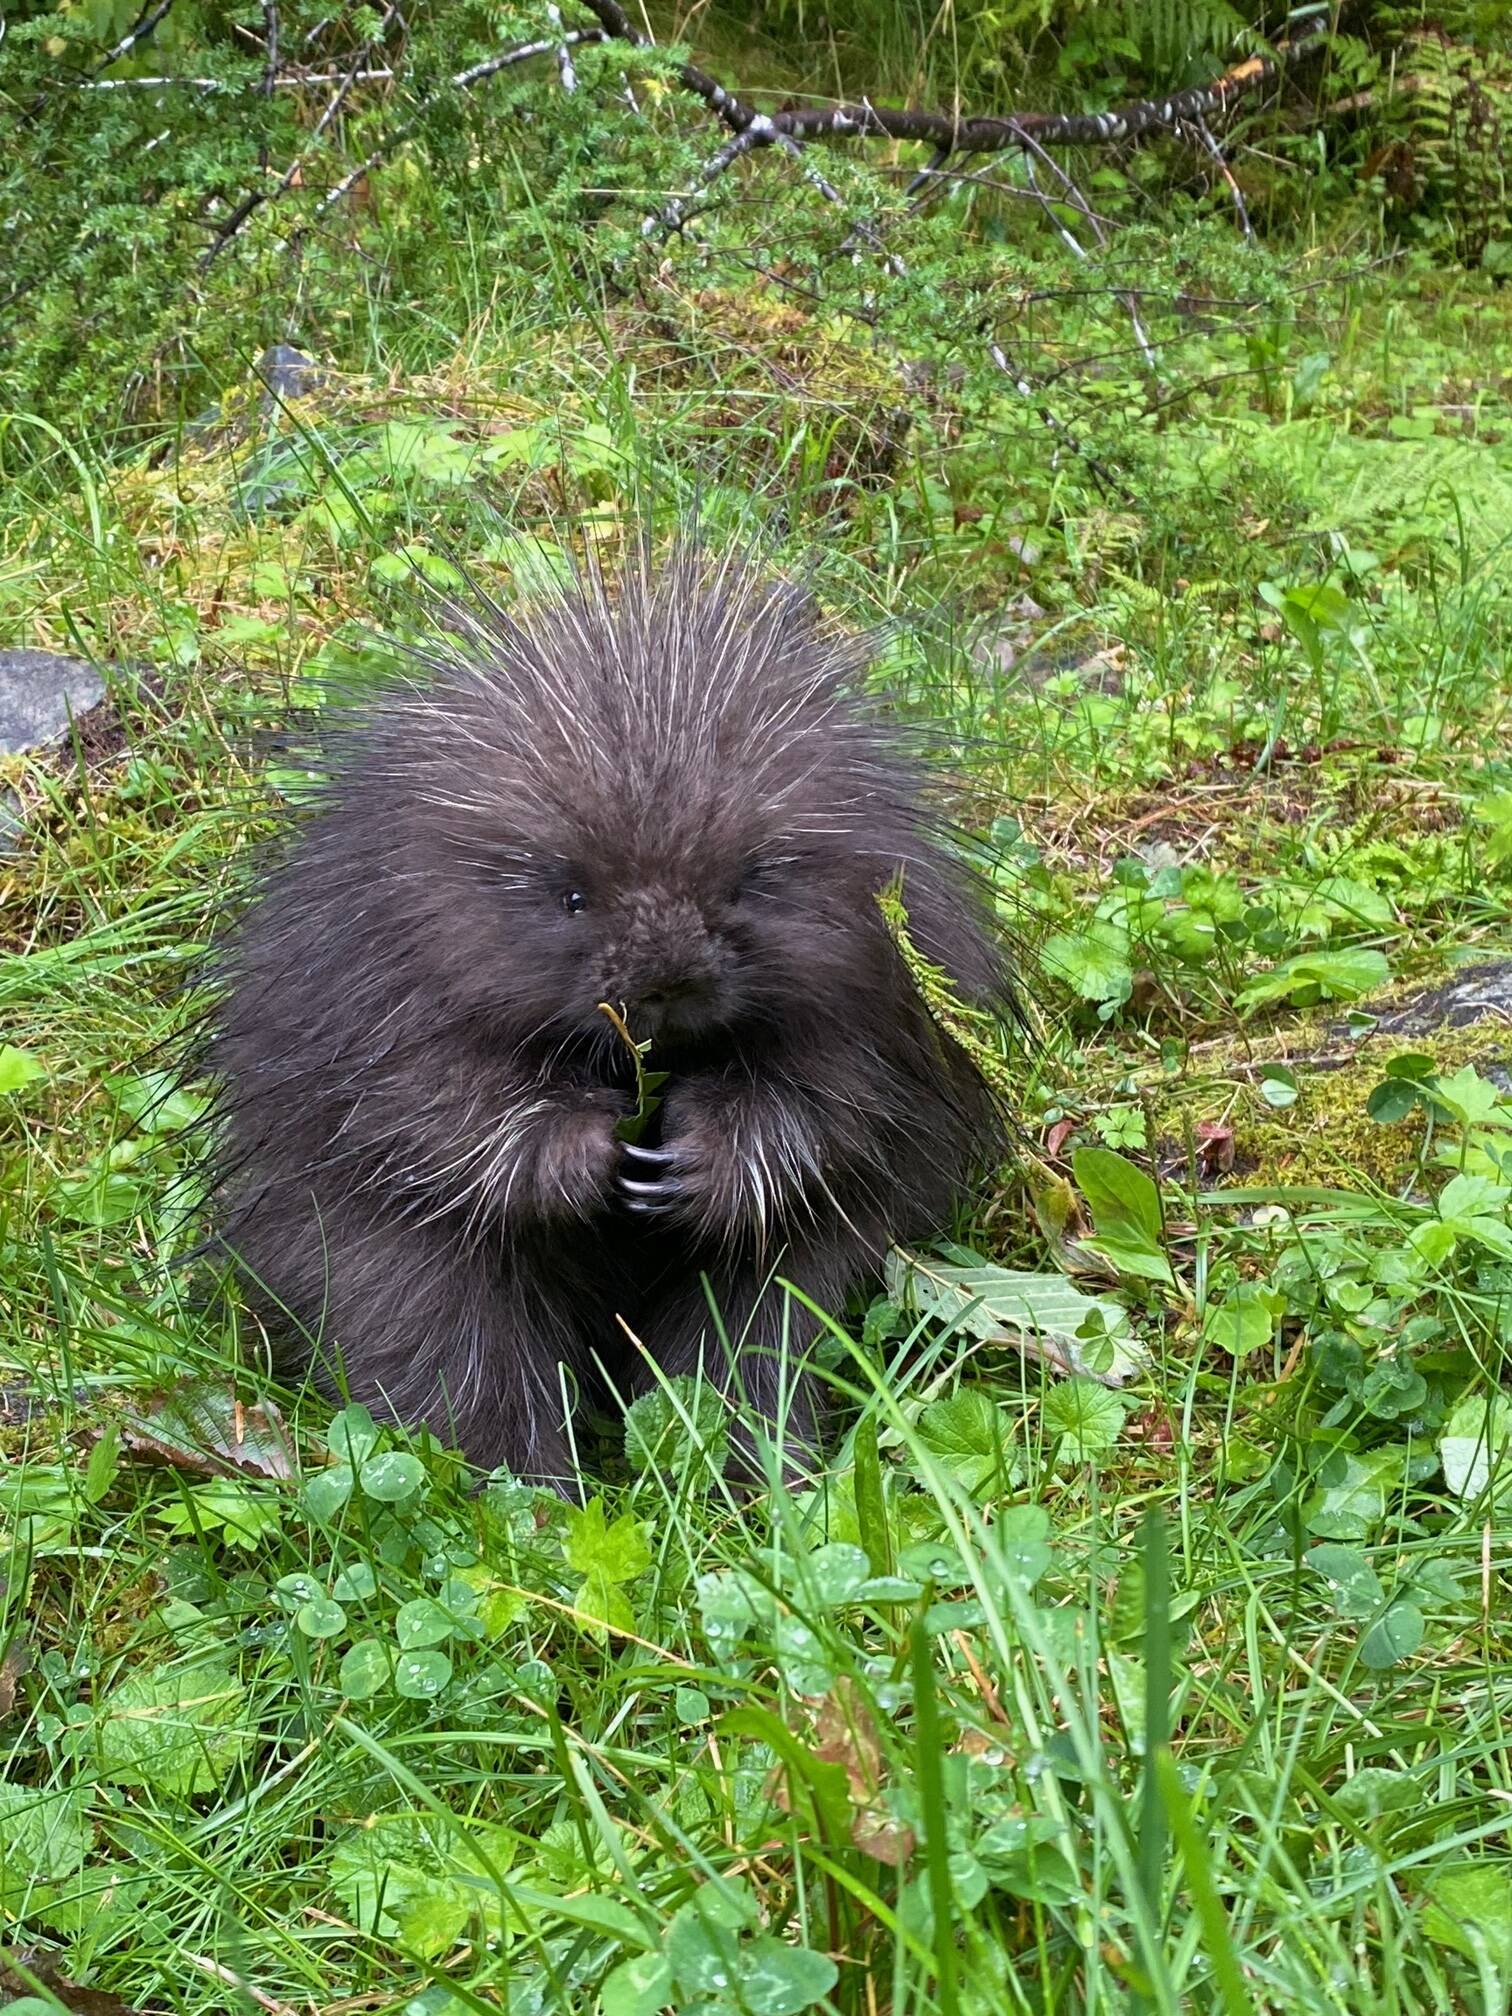 “This cute little porcupine was on the side of the Salmon Creek Dam road/Trail,” writes Jill Melcher.”Taken on Aug 17, 2022. It makes me smile every time I see it.” (Courtesy Photo / Jill Melcher)